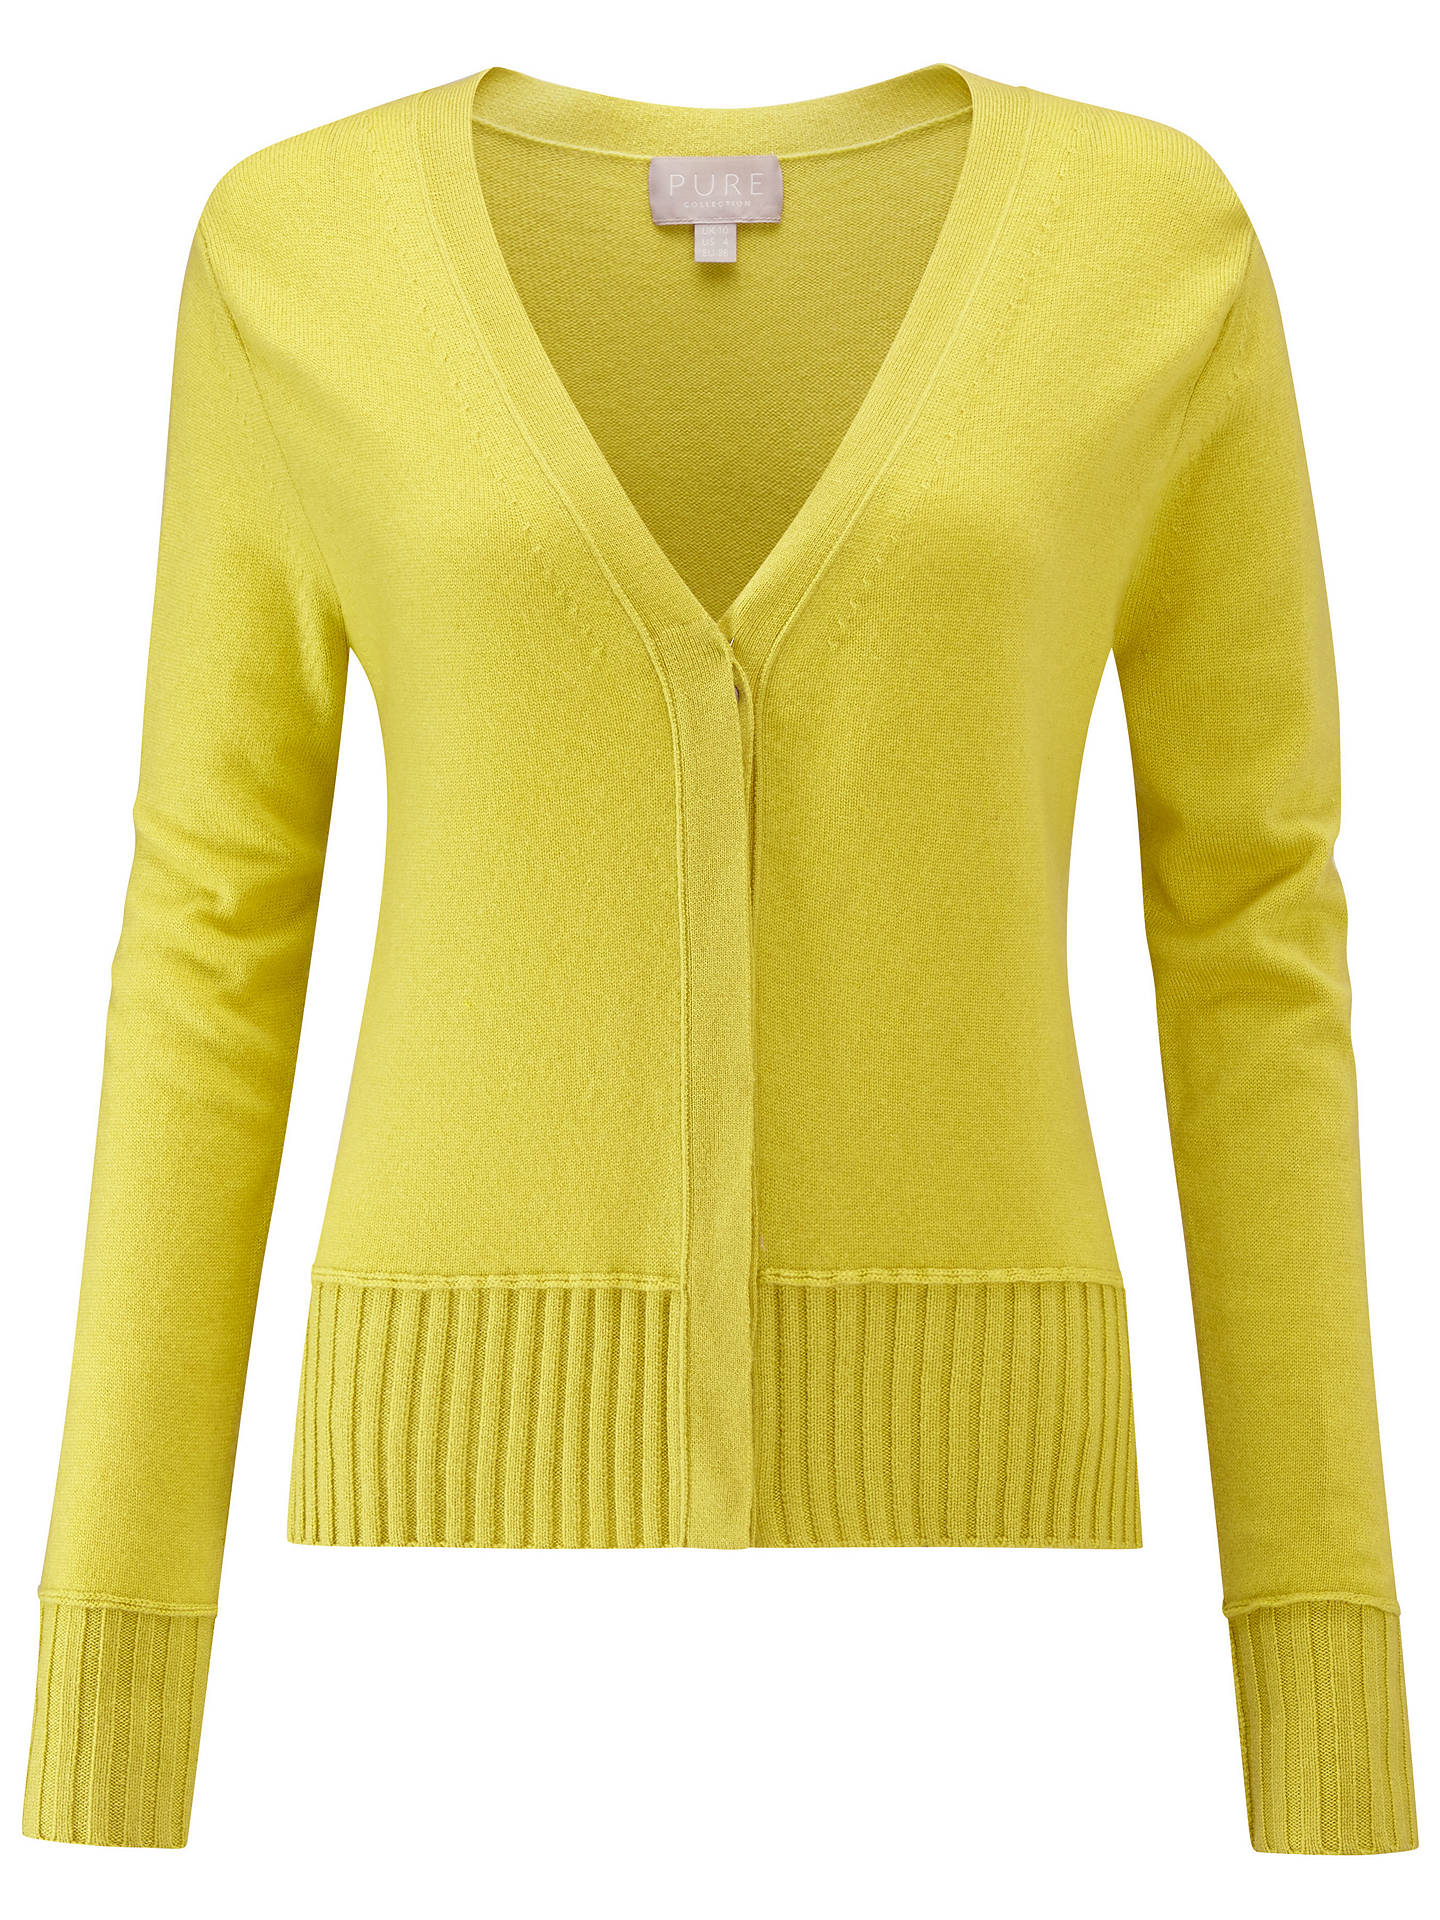 Chartreuse | Ribbed Trim V Neck Cardigan | Pure Collection